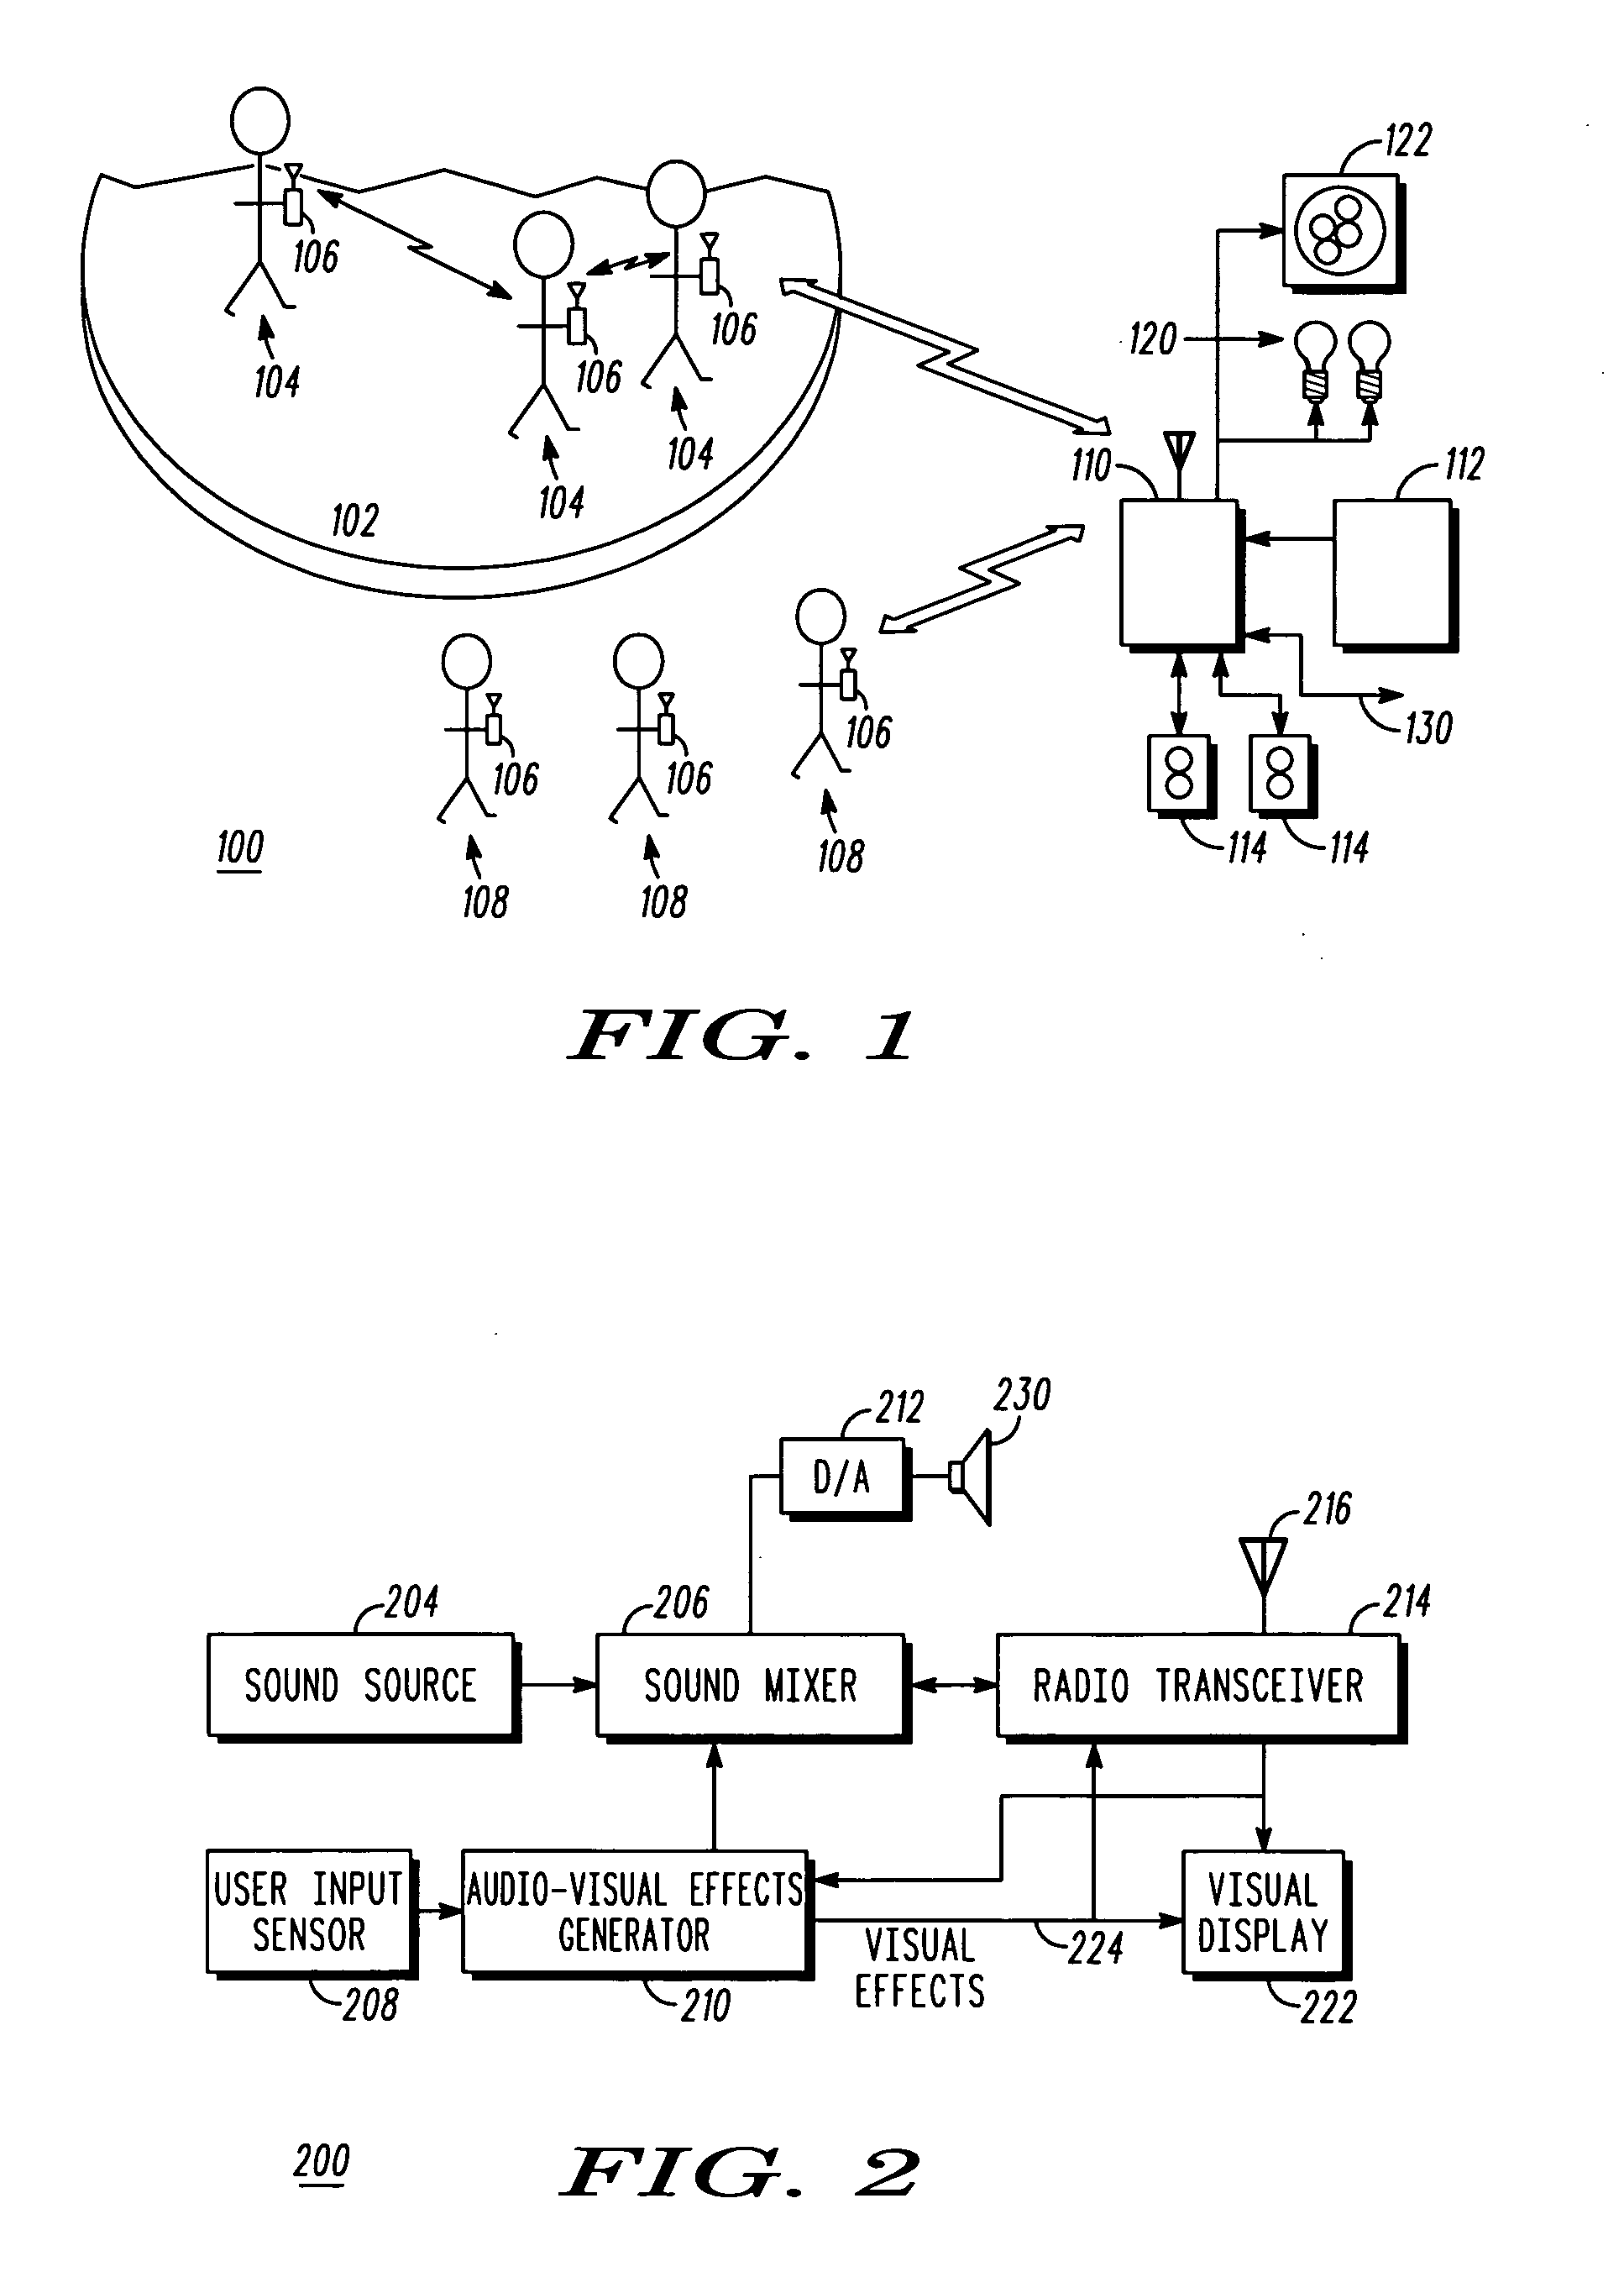 Wireless communications device with audio-visual effect generator